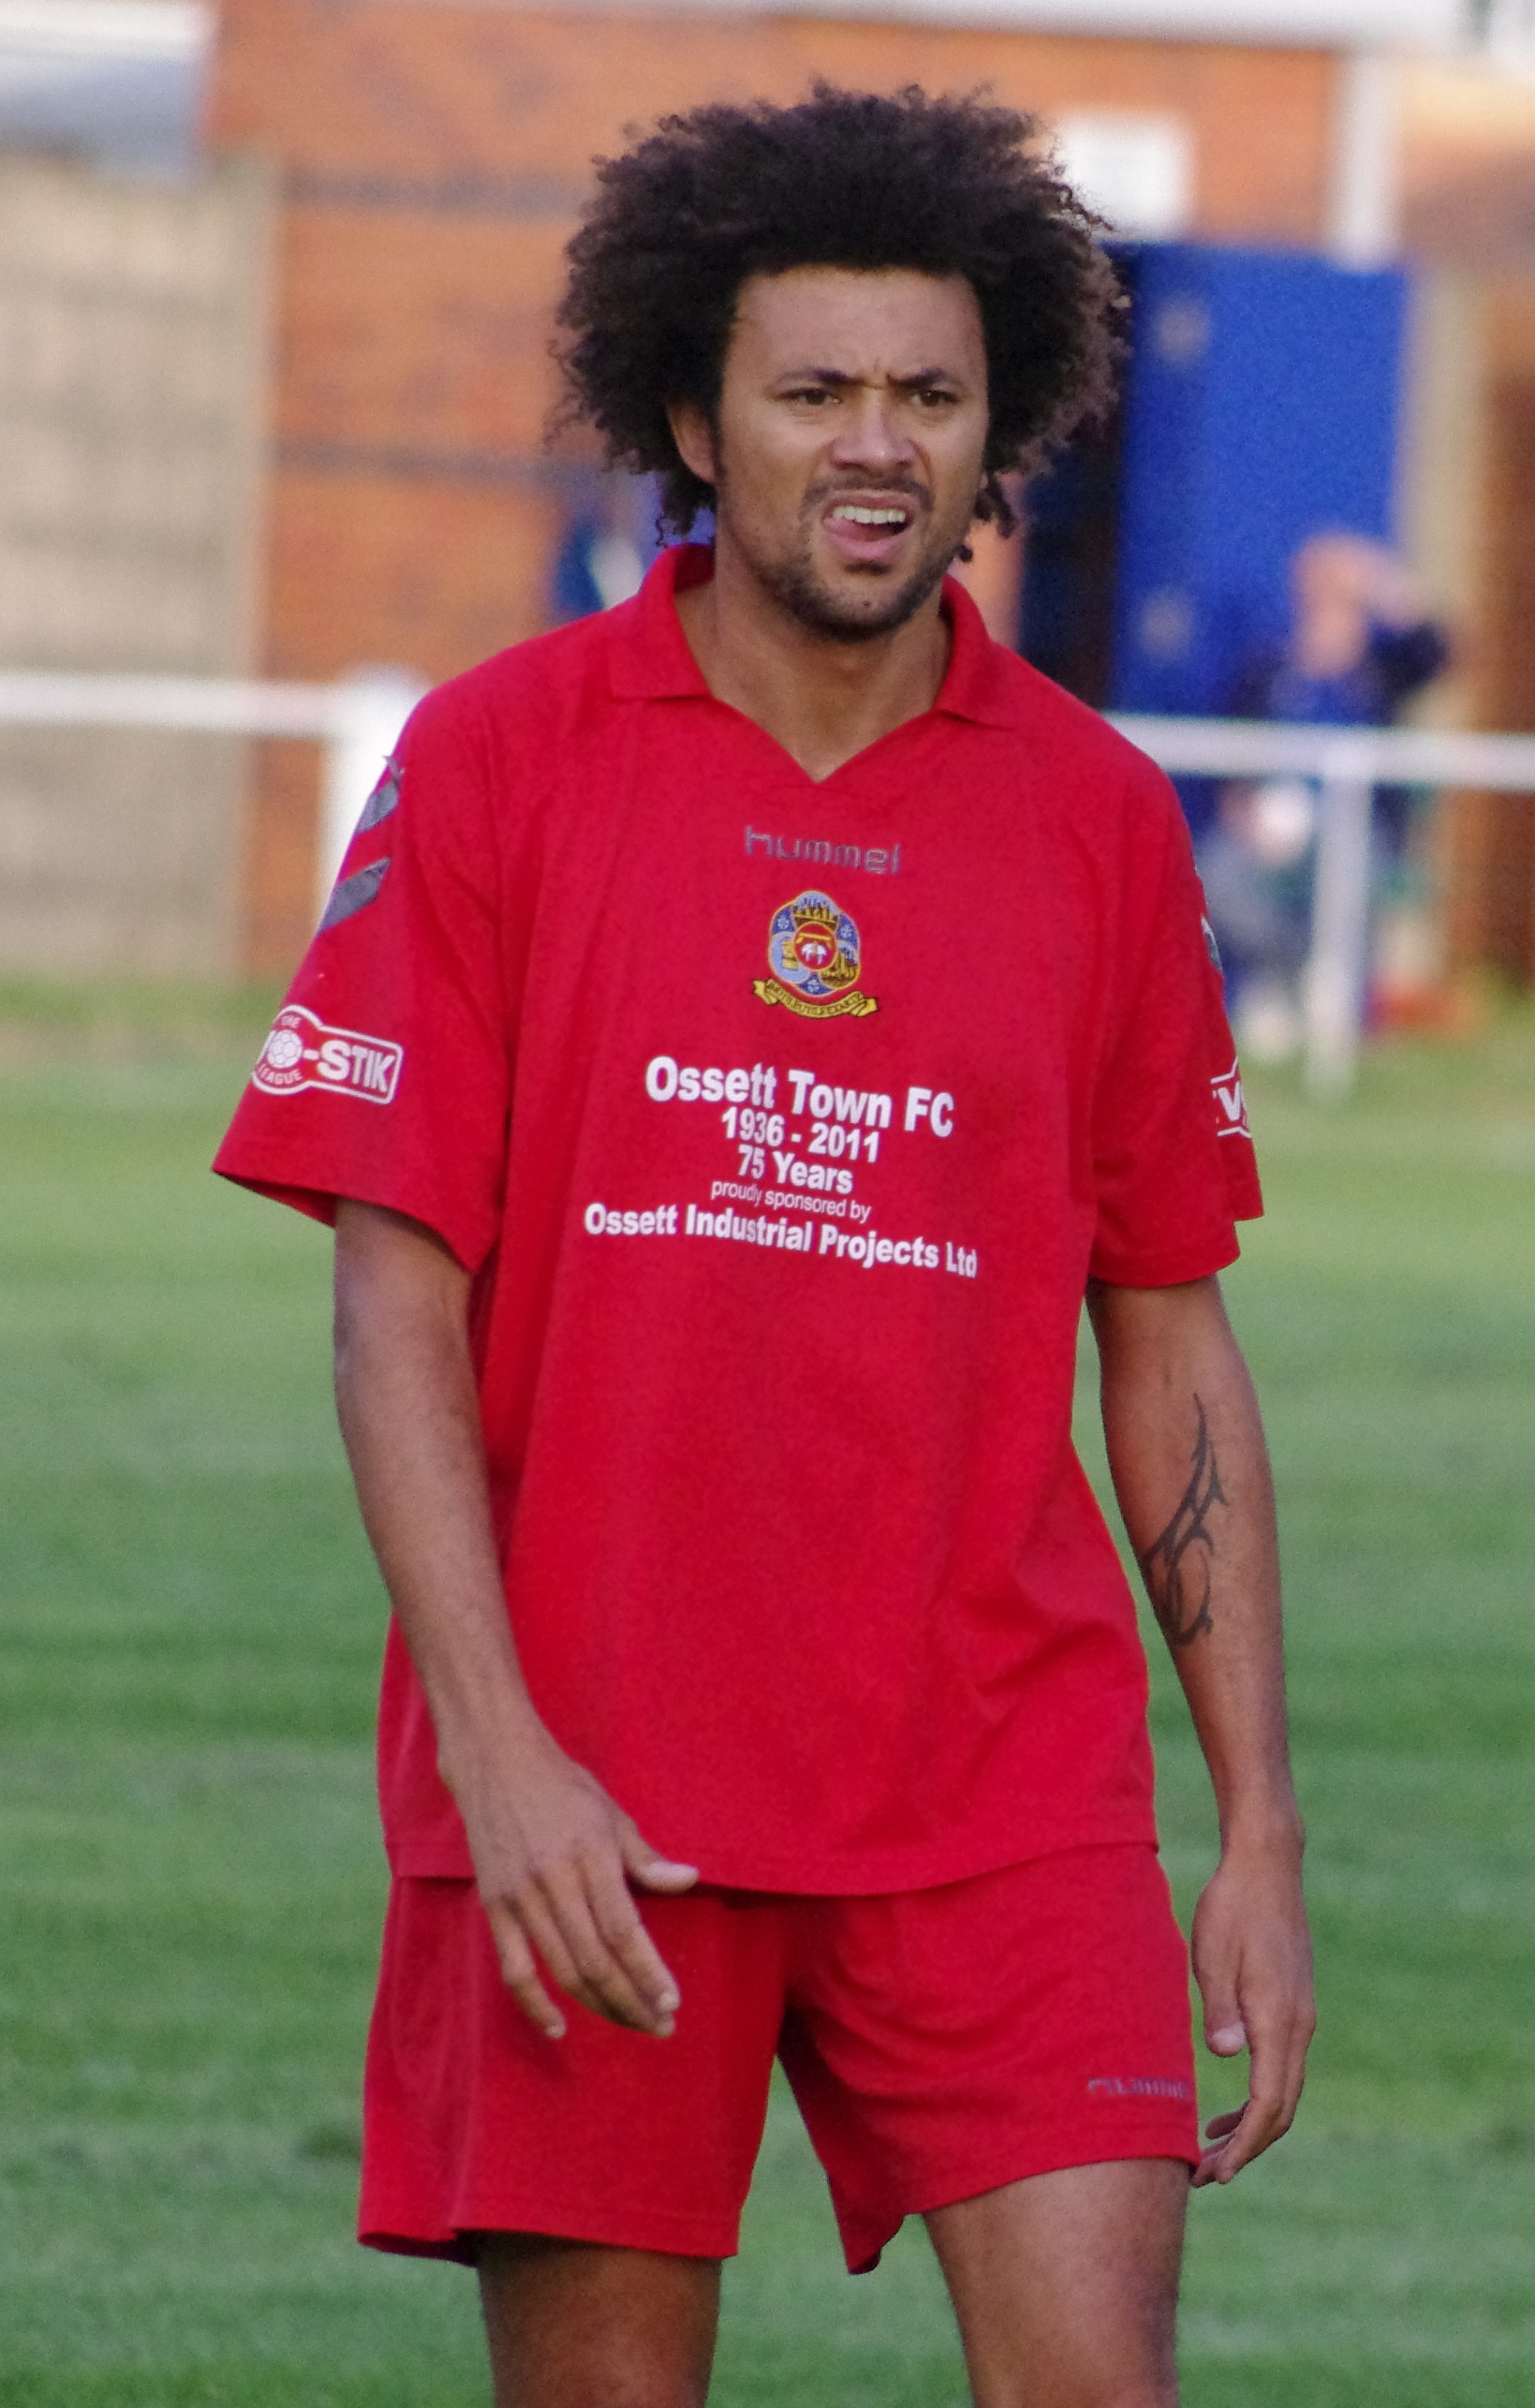 Former Doncaster Rovers striker Jason Price has left Selby Town and joined Shaw Lane Aquaforce